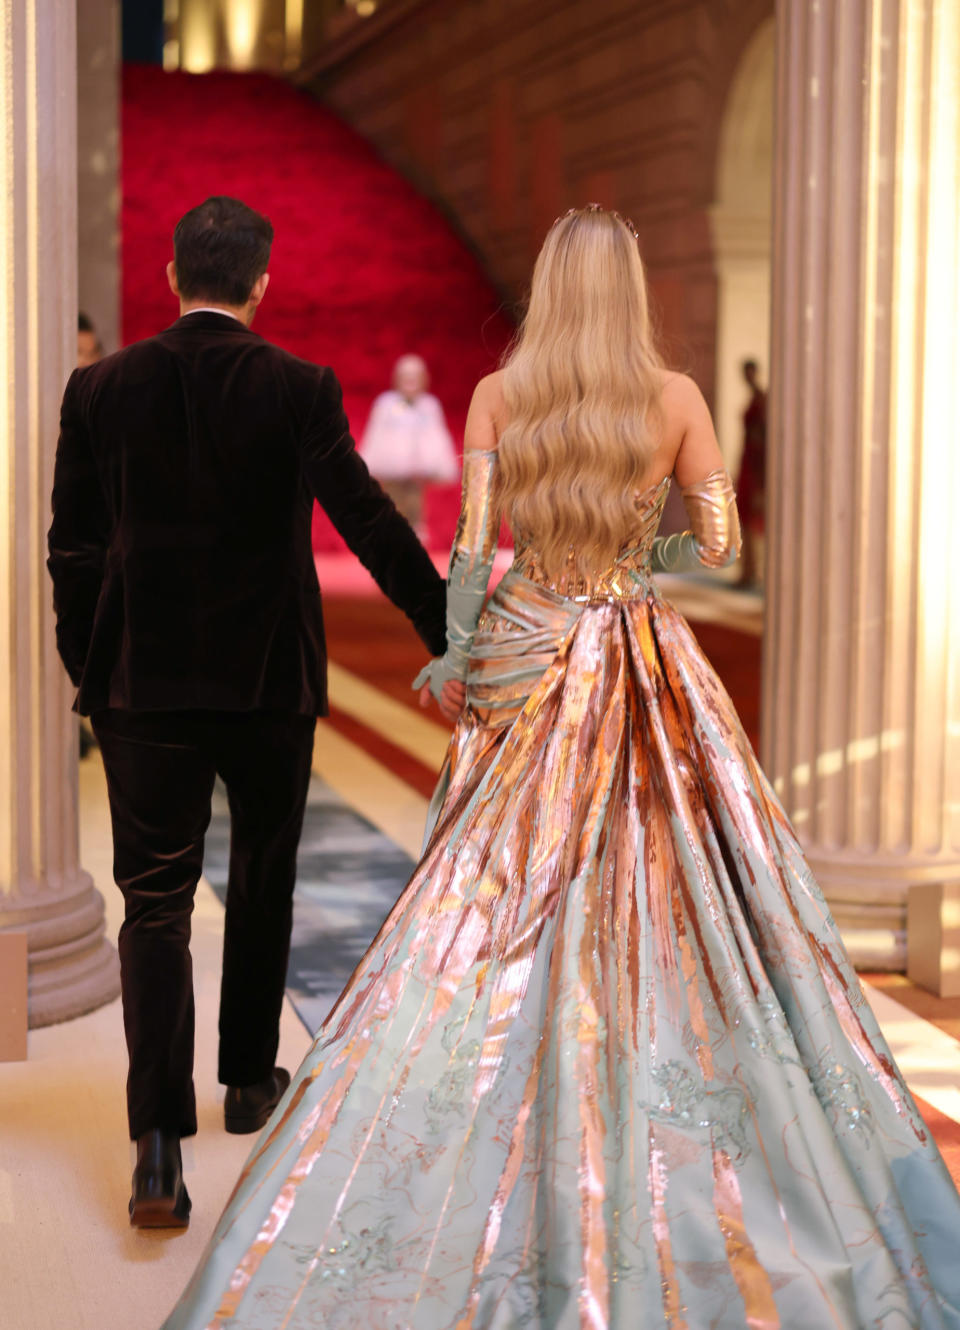 NEW YORK, NEW YORK – MAY 02: (Exclusive Coverage) (L-R) Co-Chairs Ryan Reynolds and Blake Lively attend The 2022 Met Gala Celebrating “In America: An Anthology of Fashion” at The Metropolitan Museum of Art on May 02, 2022 in New York City. (Photo by Matt Winkelmeyer/MG22/Getty Images for The Met Museum/Vogue )